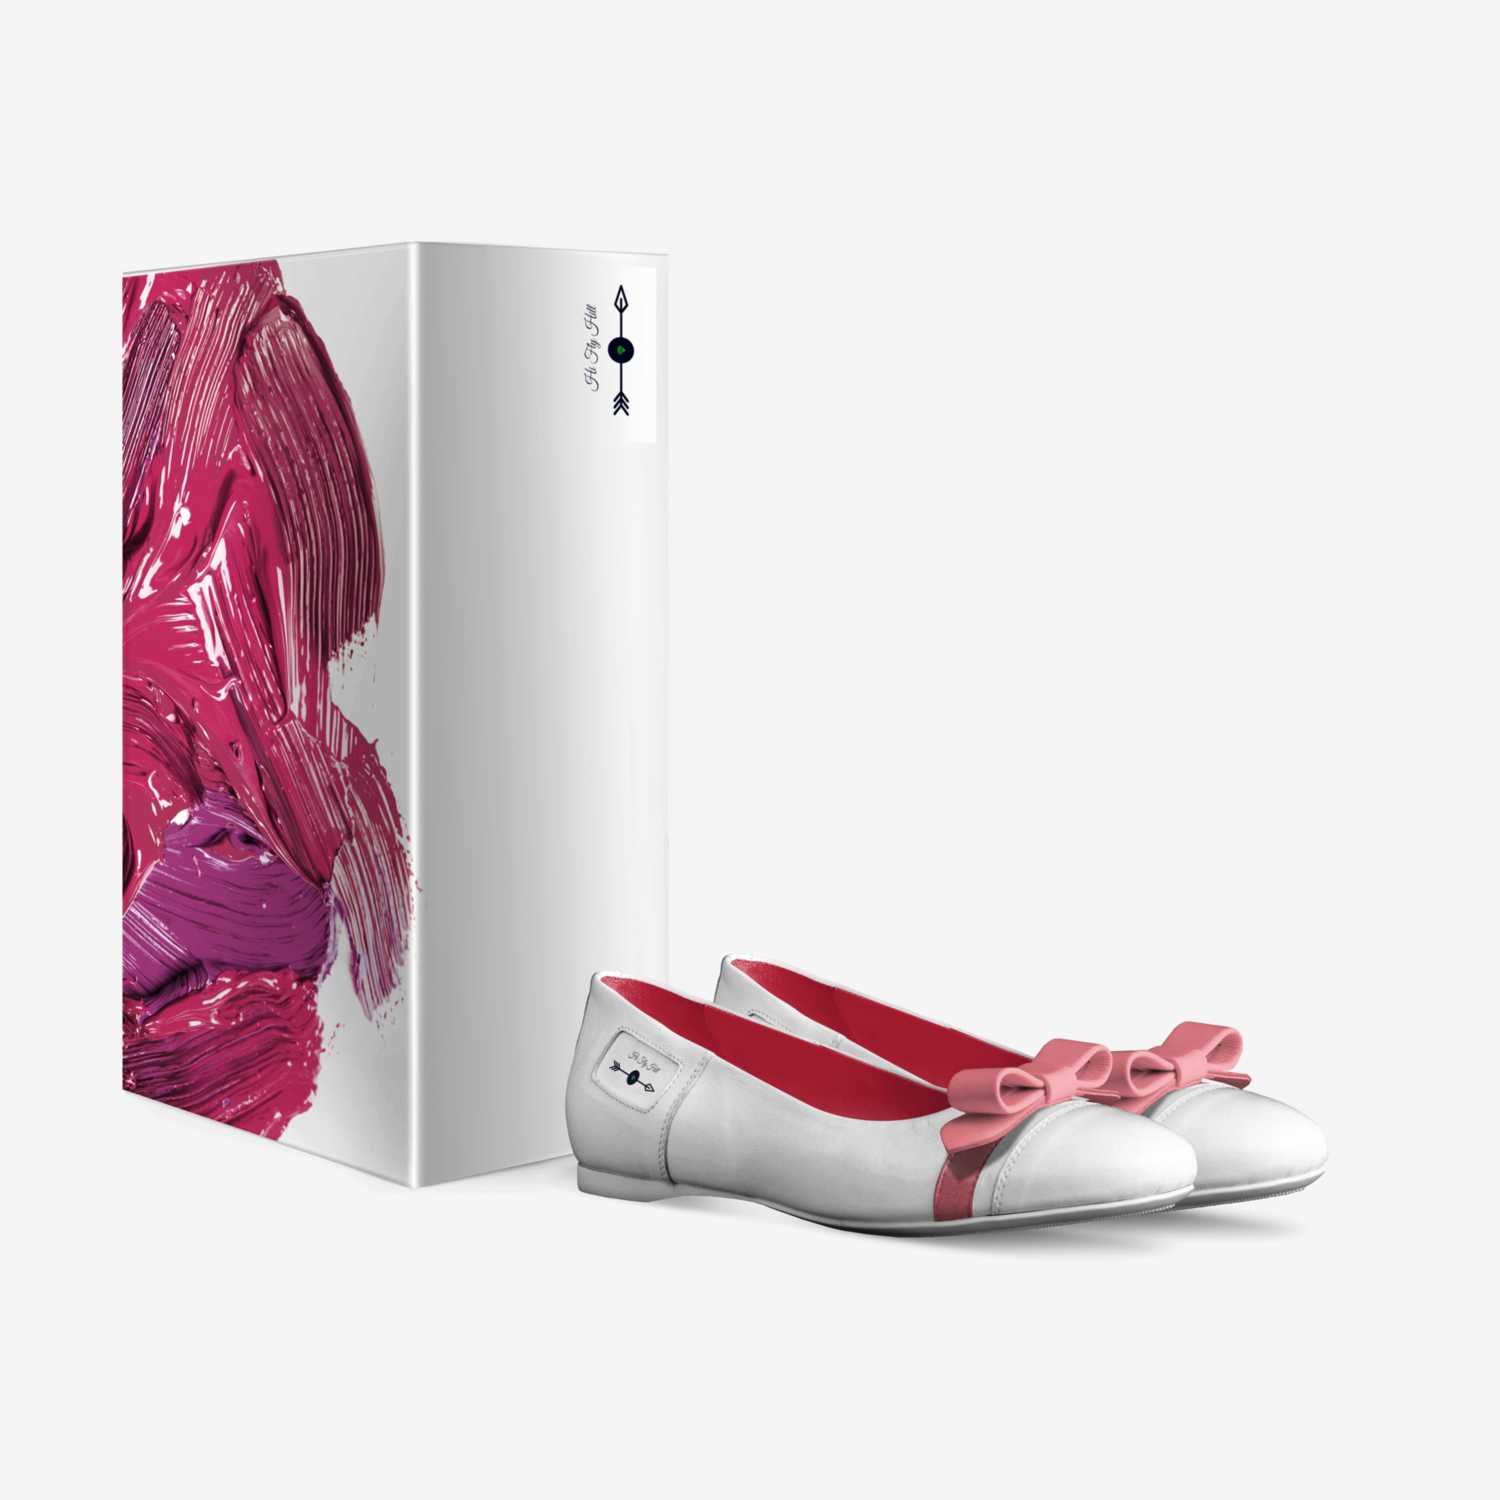 Fusha in Bloom custom made in Italy shoes by Lara Grosso | Box view